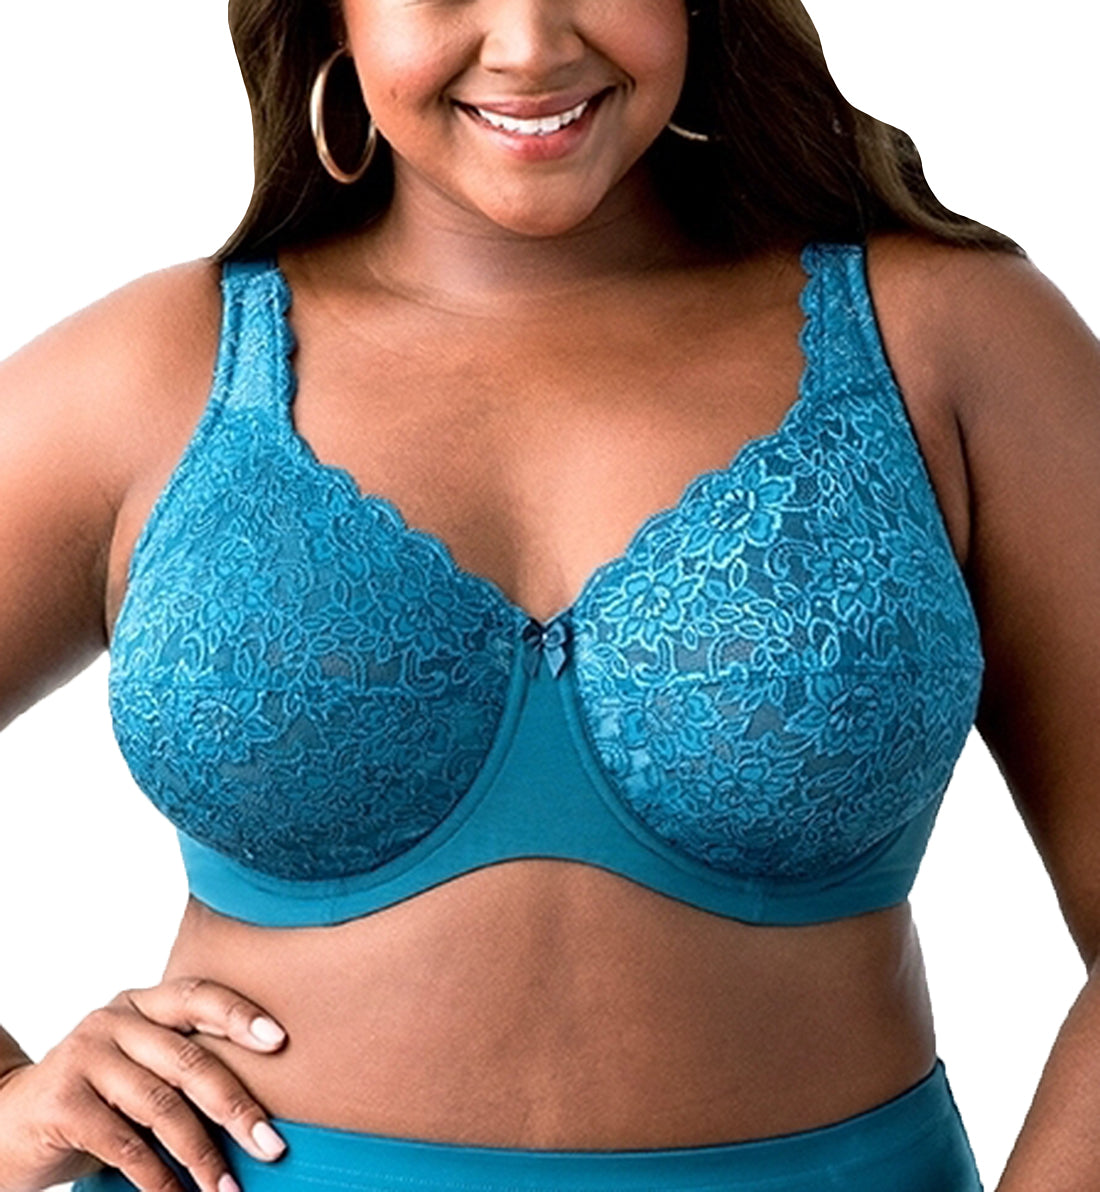 Elila Isabella Stretch Lace Full Coverage Underwire Bra (2311),34I,Teal - Teal,34I